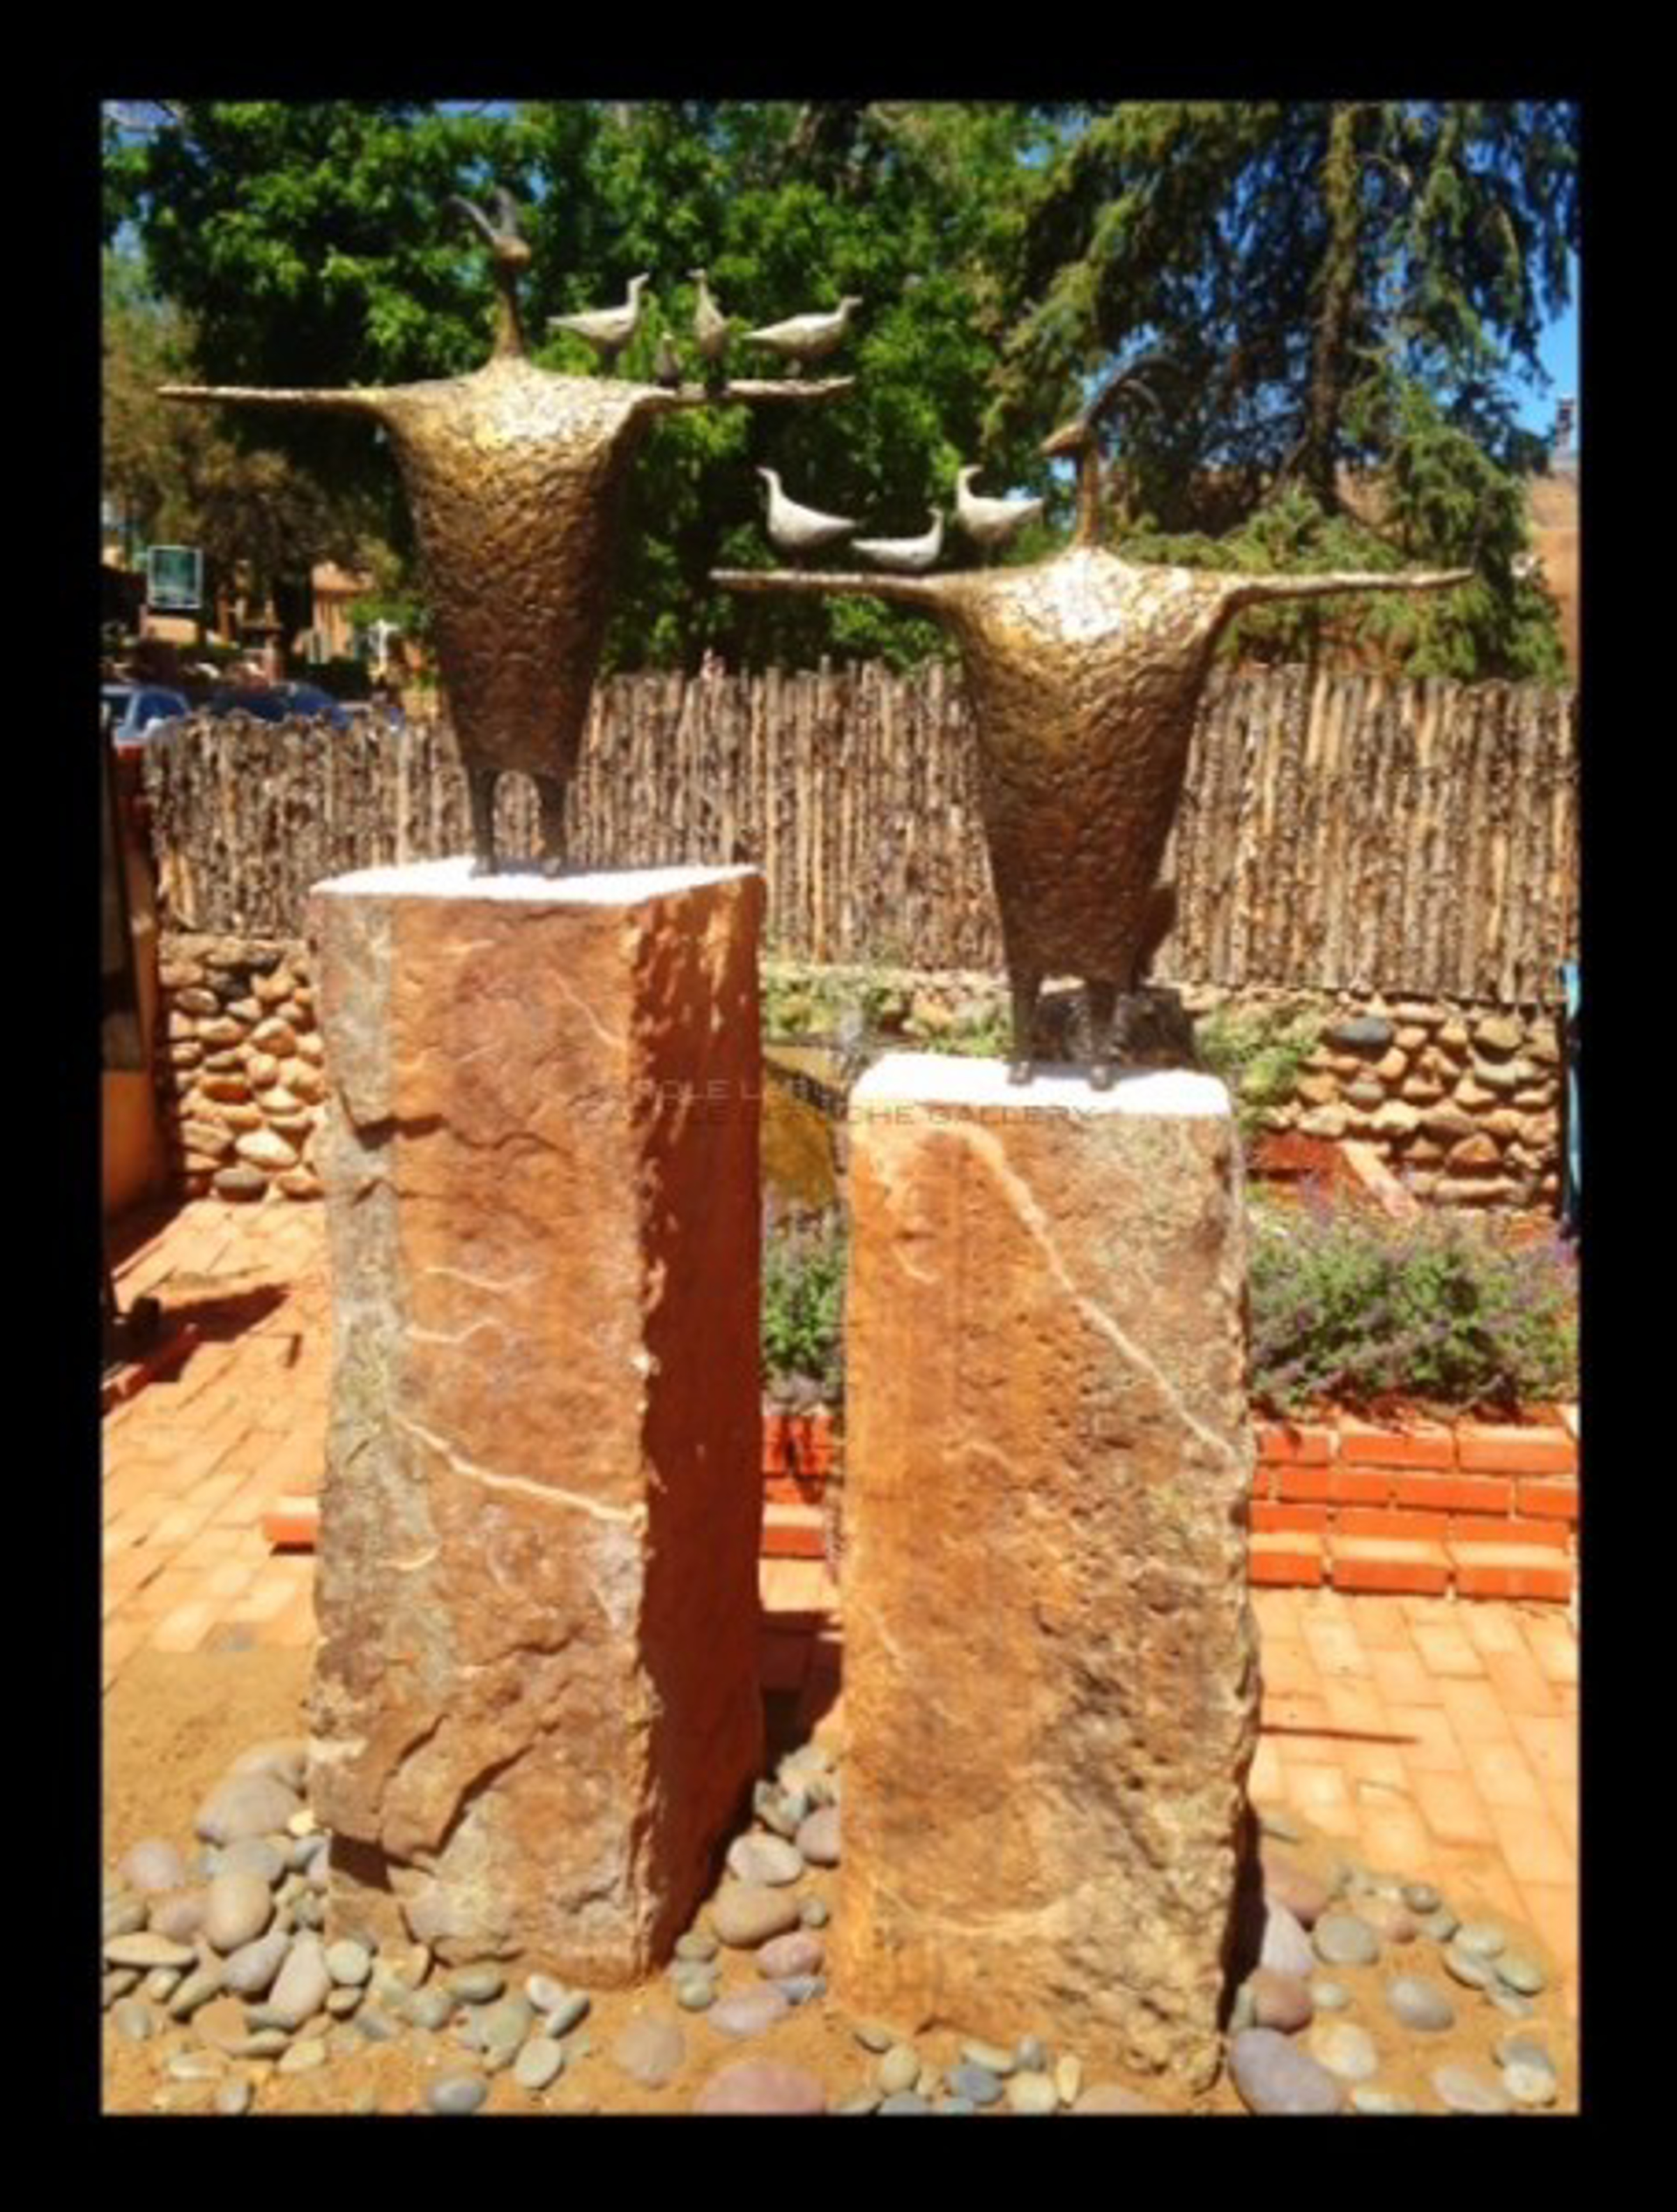 PROTECTORS OF THE MIGRATION Sculptures 34"x33"x10" $7800 each Two Rock Pedestals $7500 OR Two Sculptures with Two Rock Pedestals $30,600. May be purchased separately or together. by Jill Shwaiko